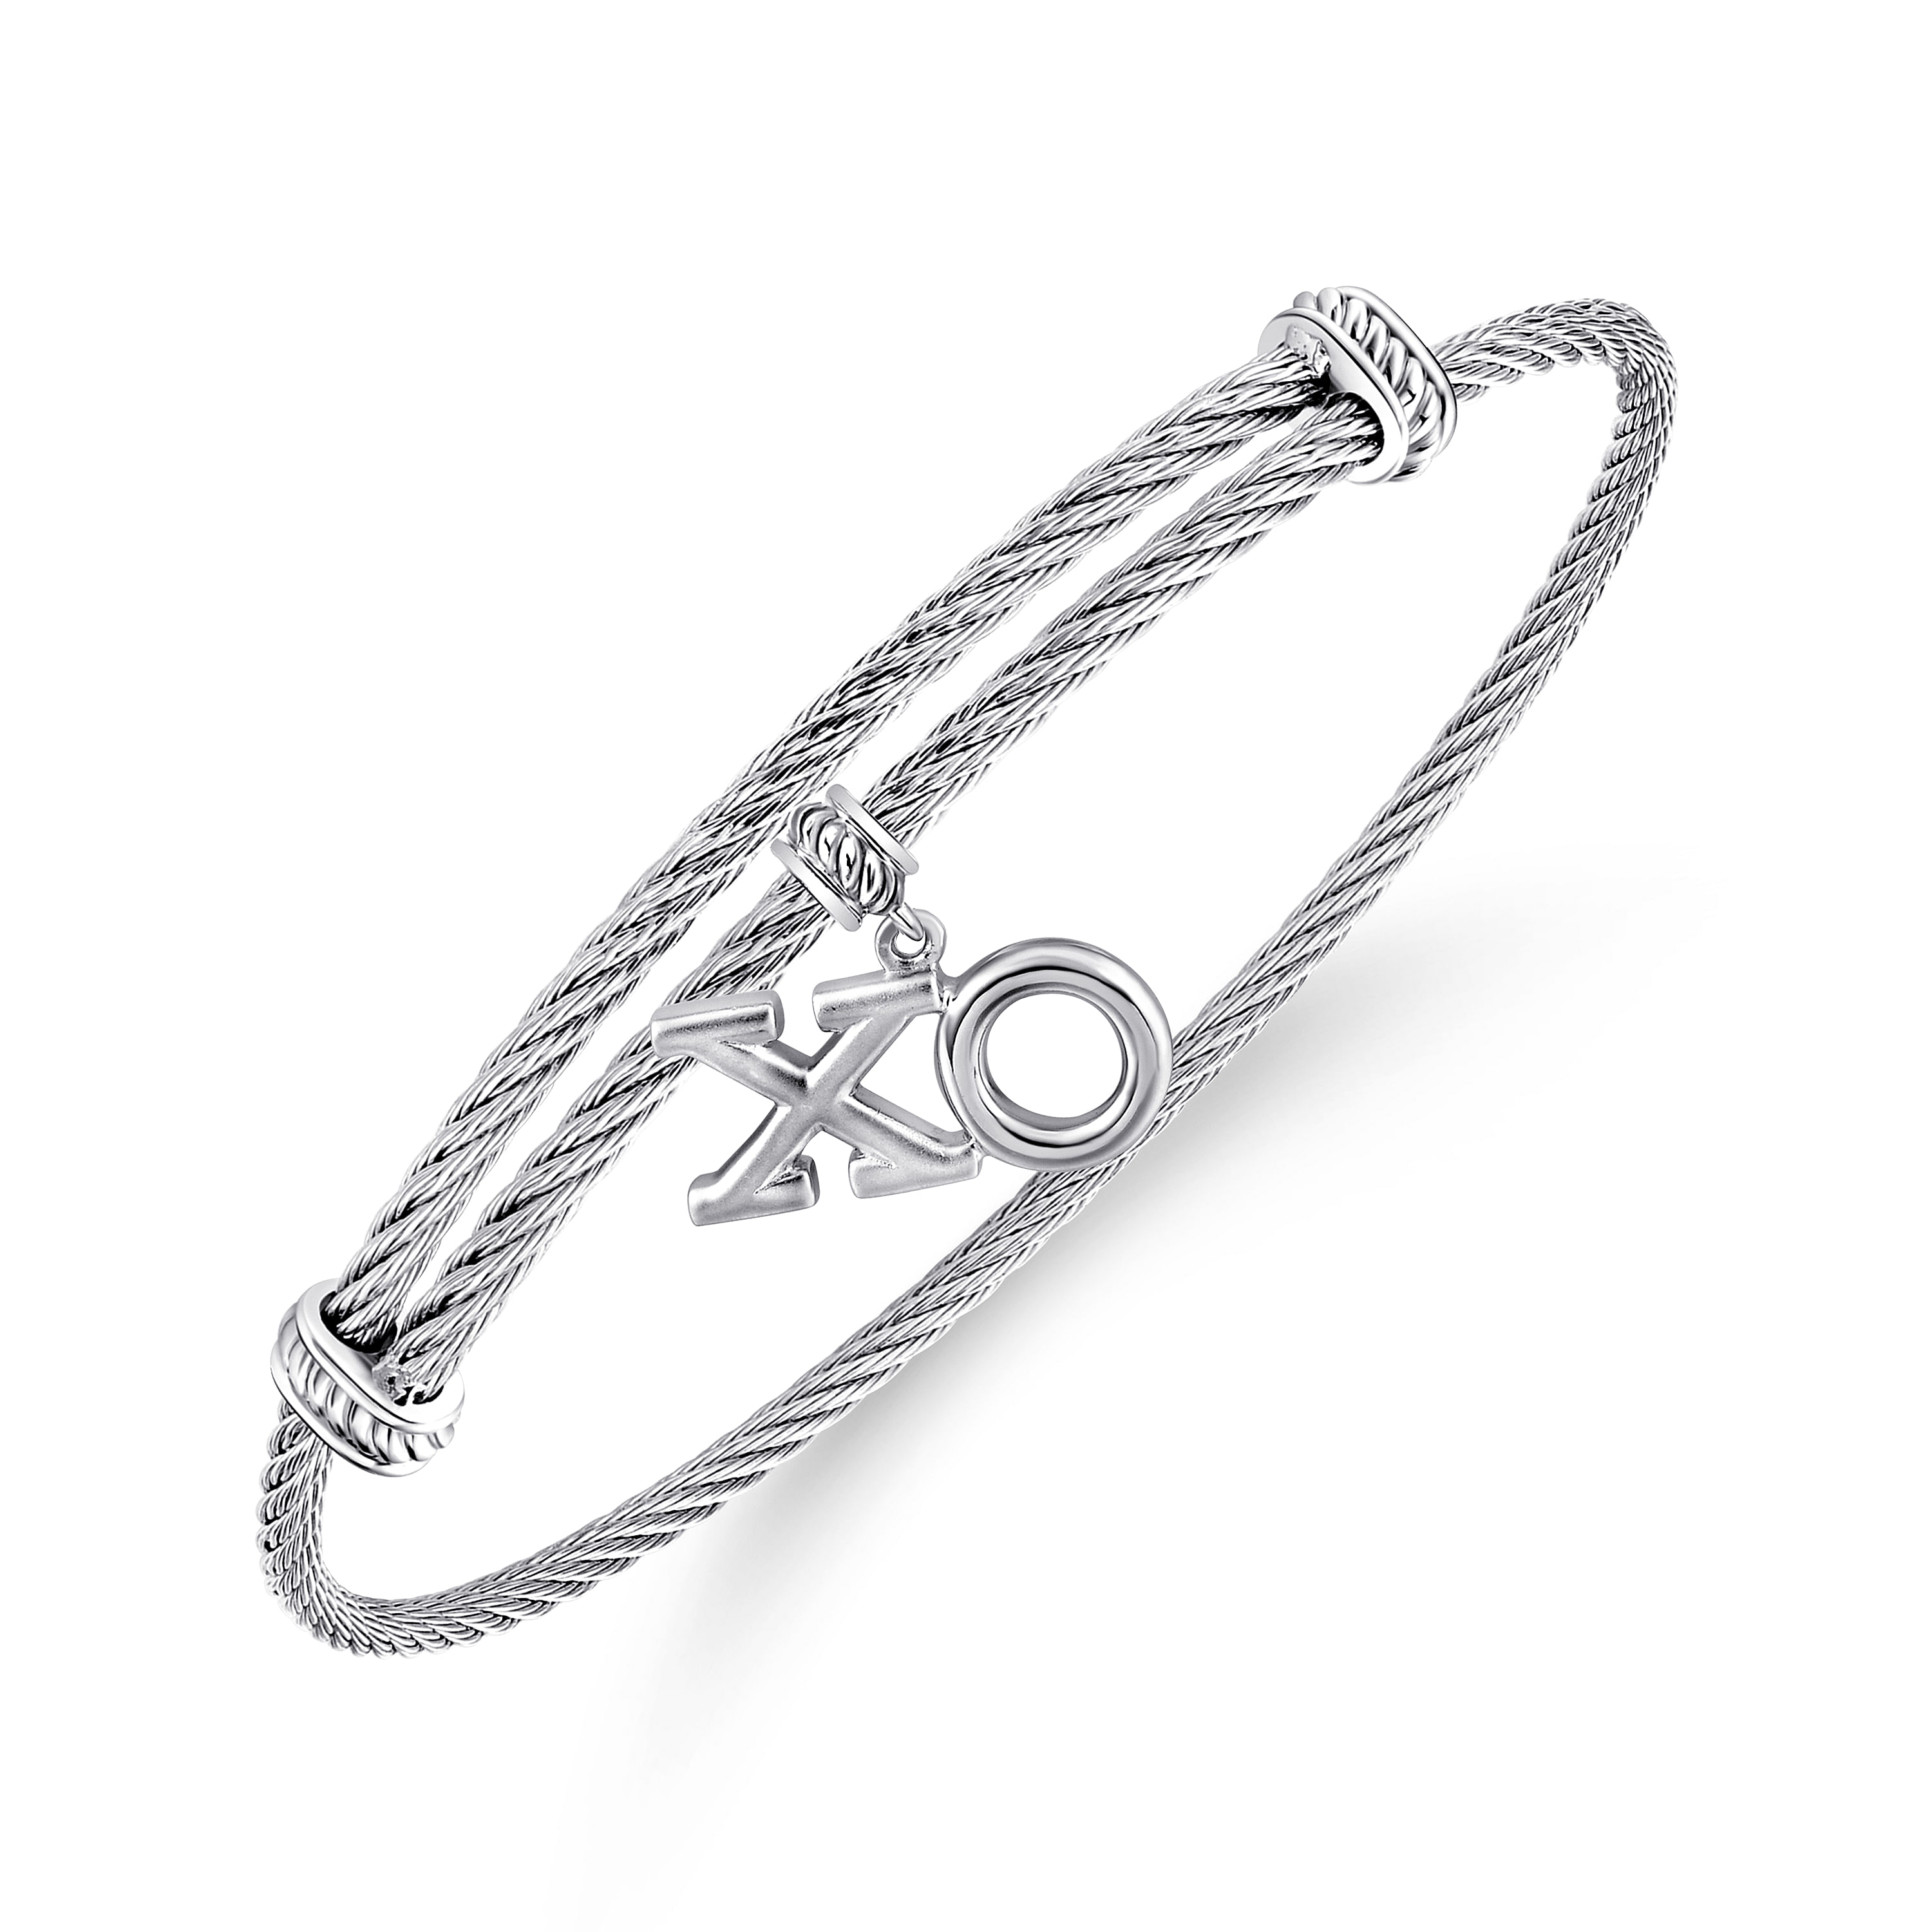 Adjustable Twisted Cable Stainless Steel Bangle with Sterling Silver XO Charm - Shot 2